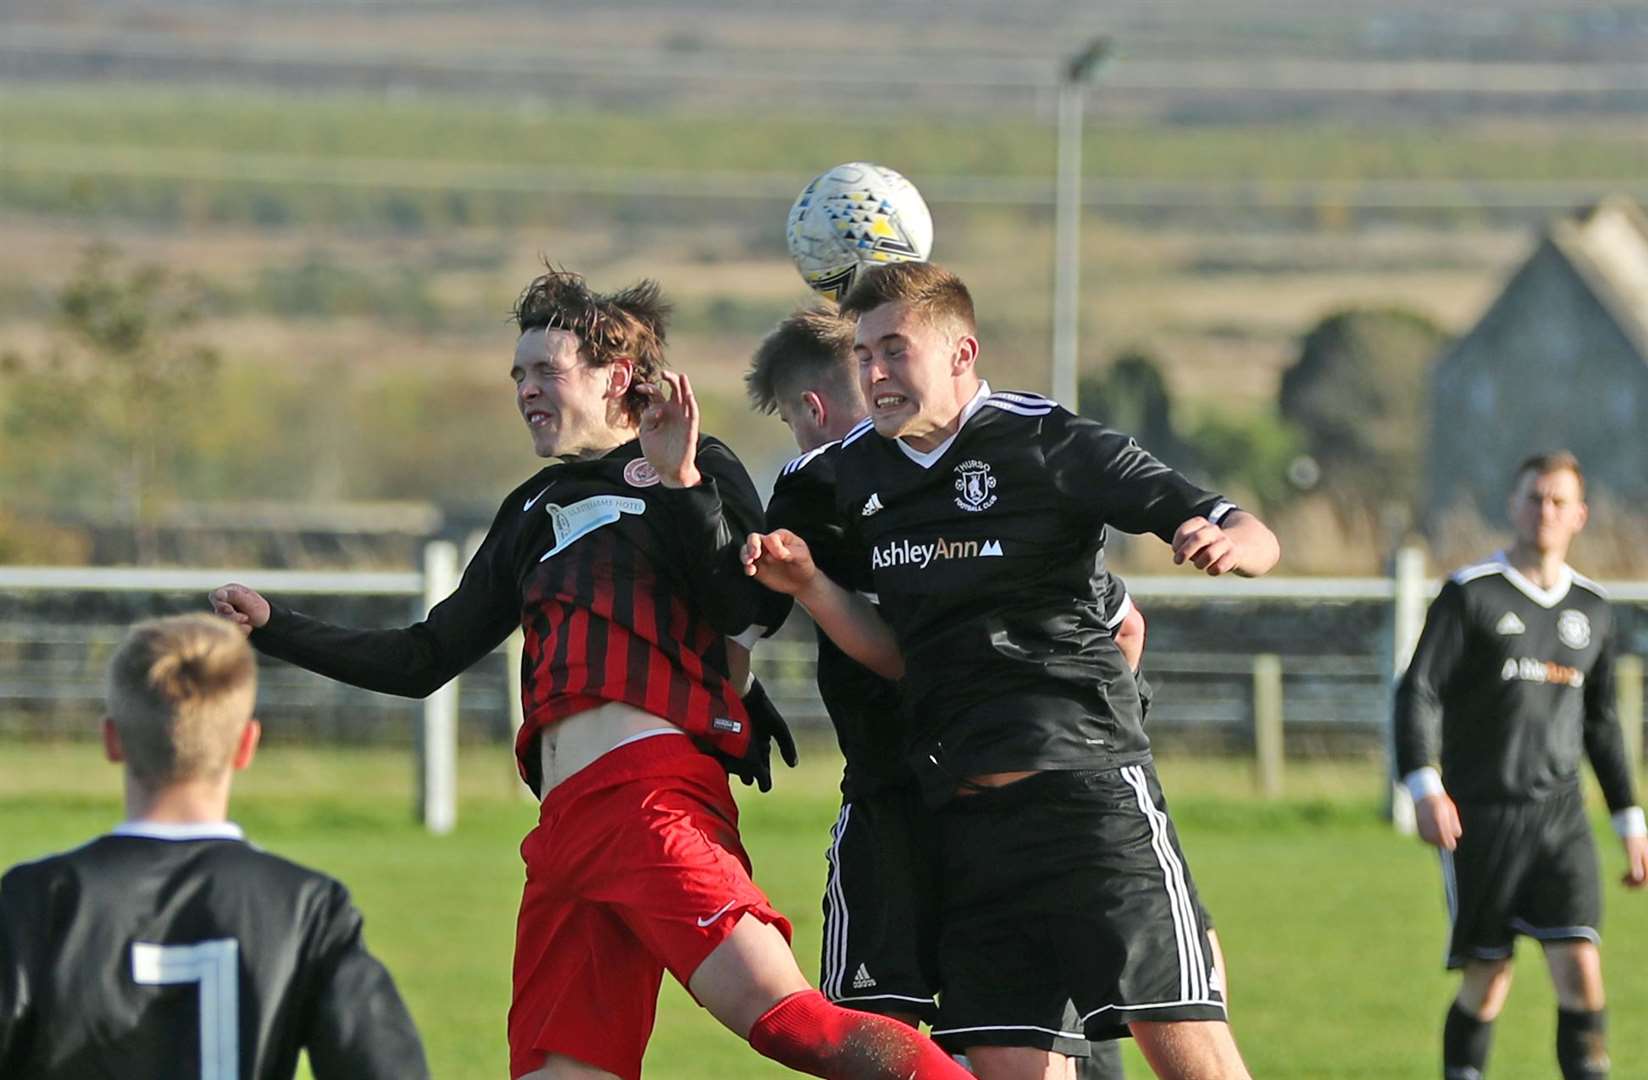 Halkirk United and Thurso in a Caithness derby in the North Caledonian League in October 2020. Picture: James Gunn